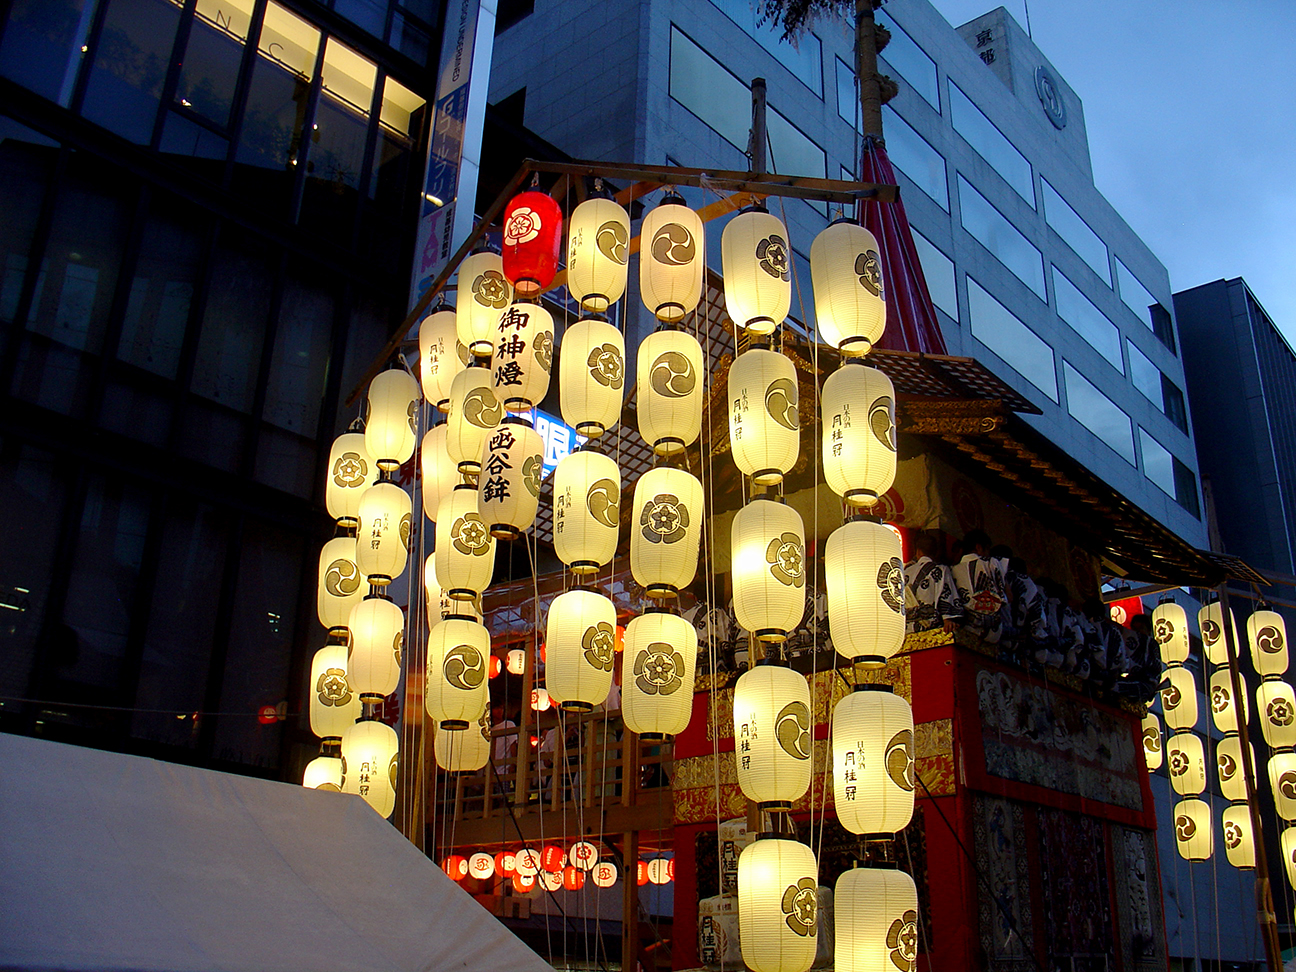 A float at sunset featuring lanterns and artists.